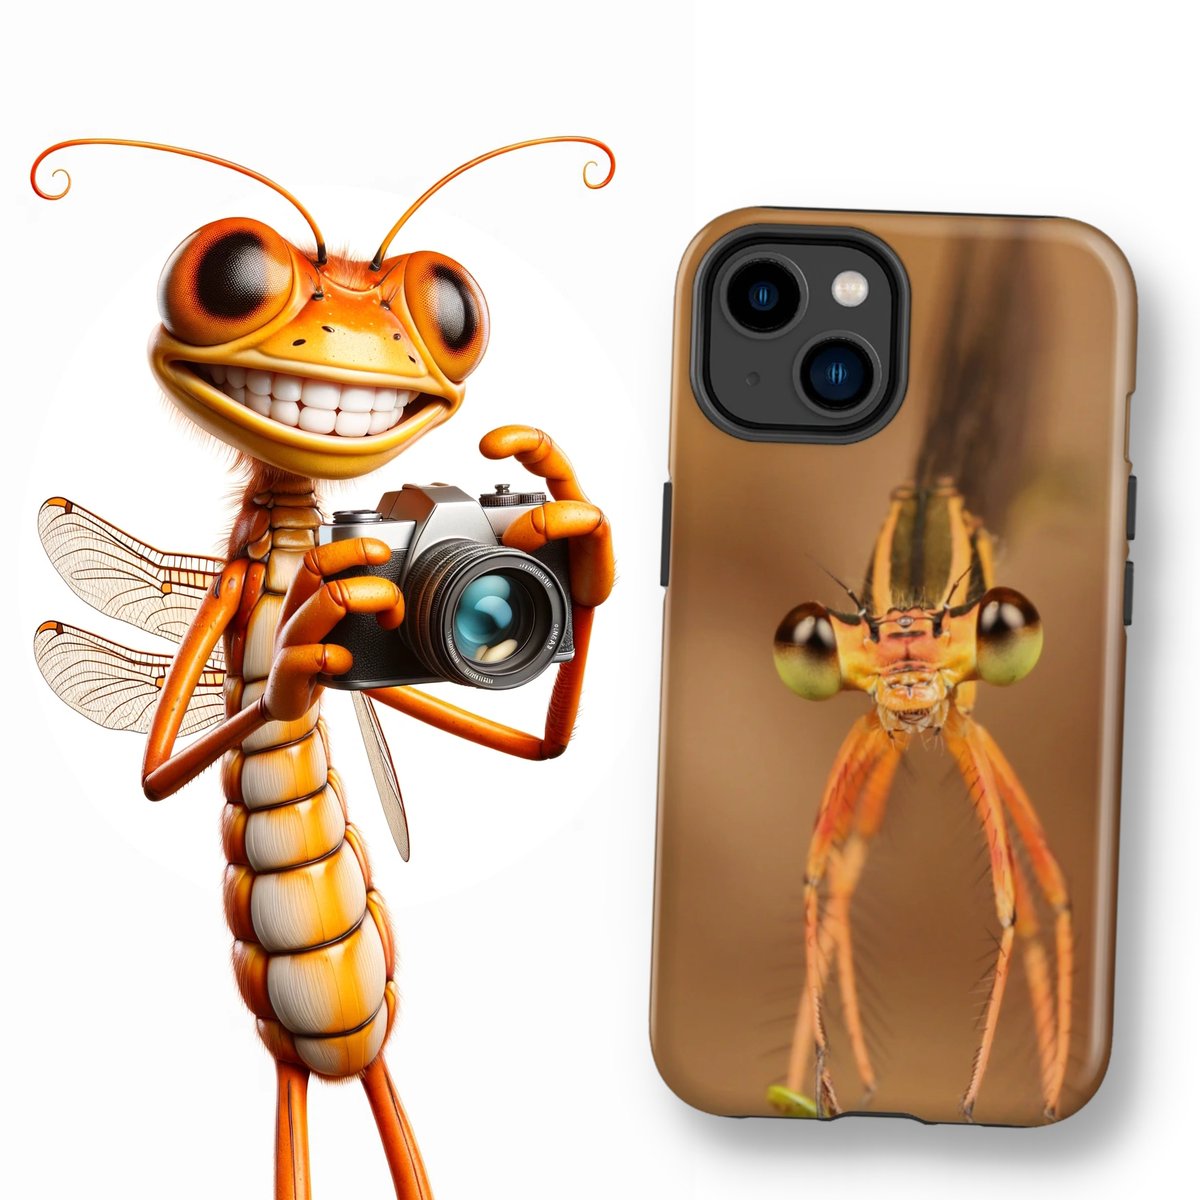 For a short time, there is 25% off everything in my #REDBUBBLE store, including SINOBUG bug-themed phone cases!! Black-kneed Featherleg Damselfly (Pseudocopera ciliata, Platycnemididae), female Pu'er, Yunnan,China redbubble.com/shop/ap/152261… Full store: itchydogimages.redbubble.com